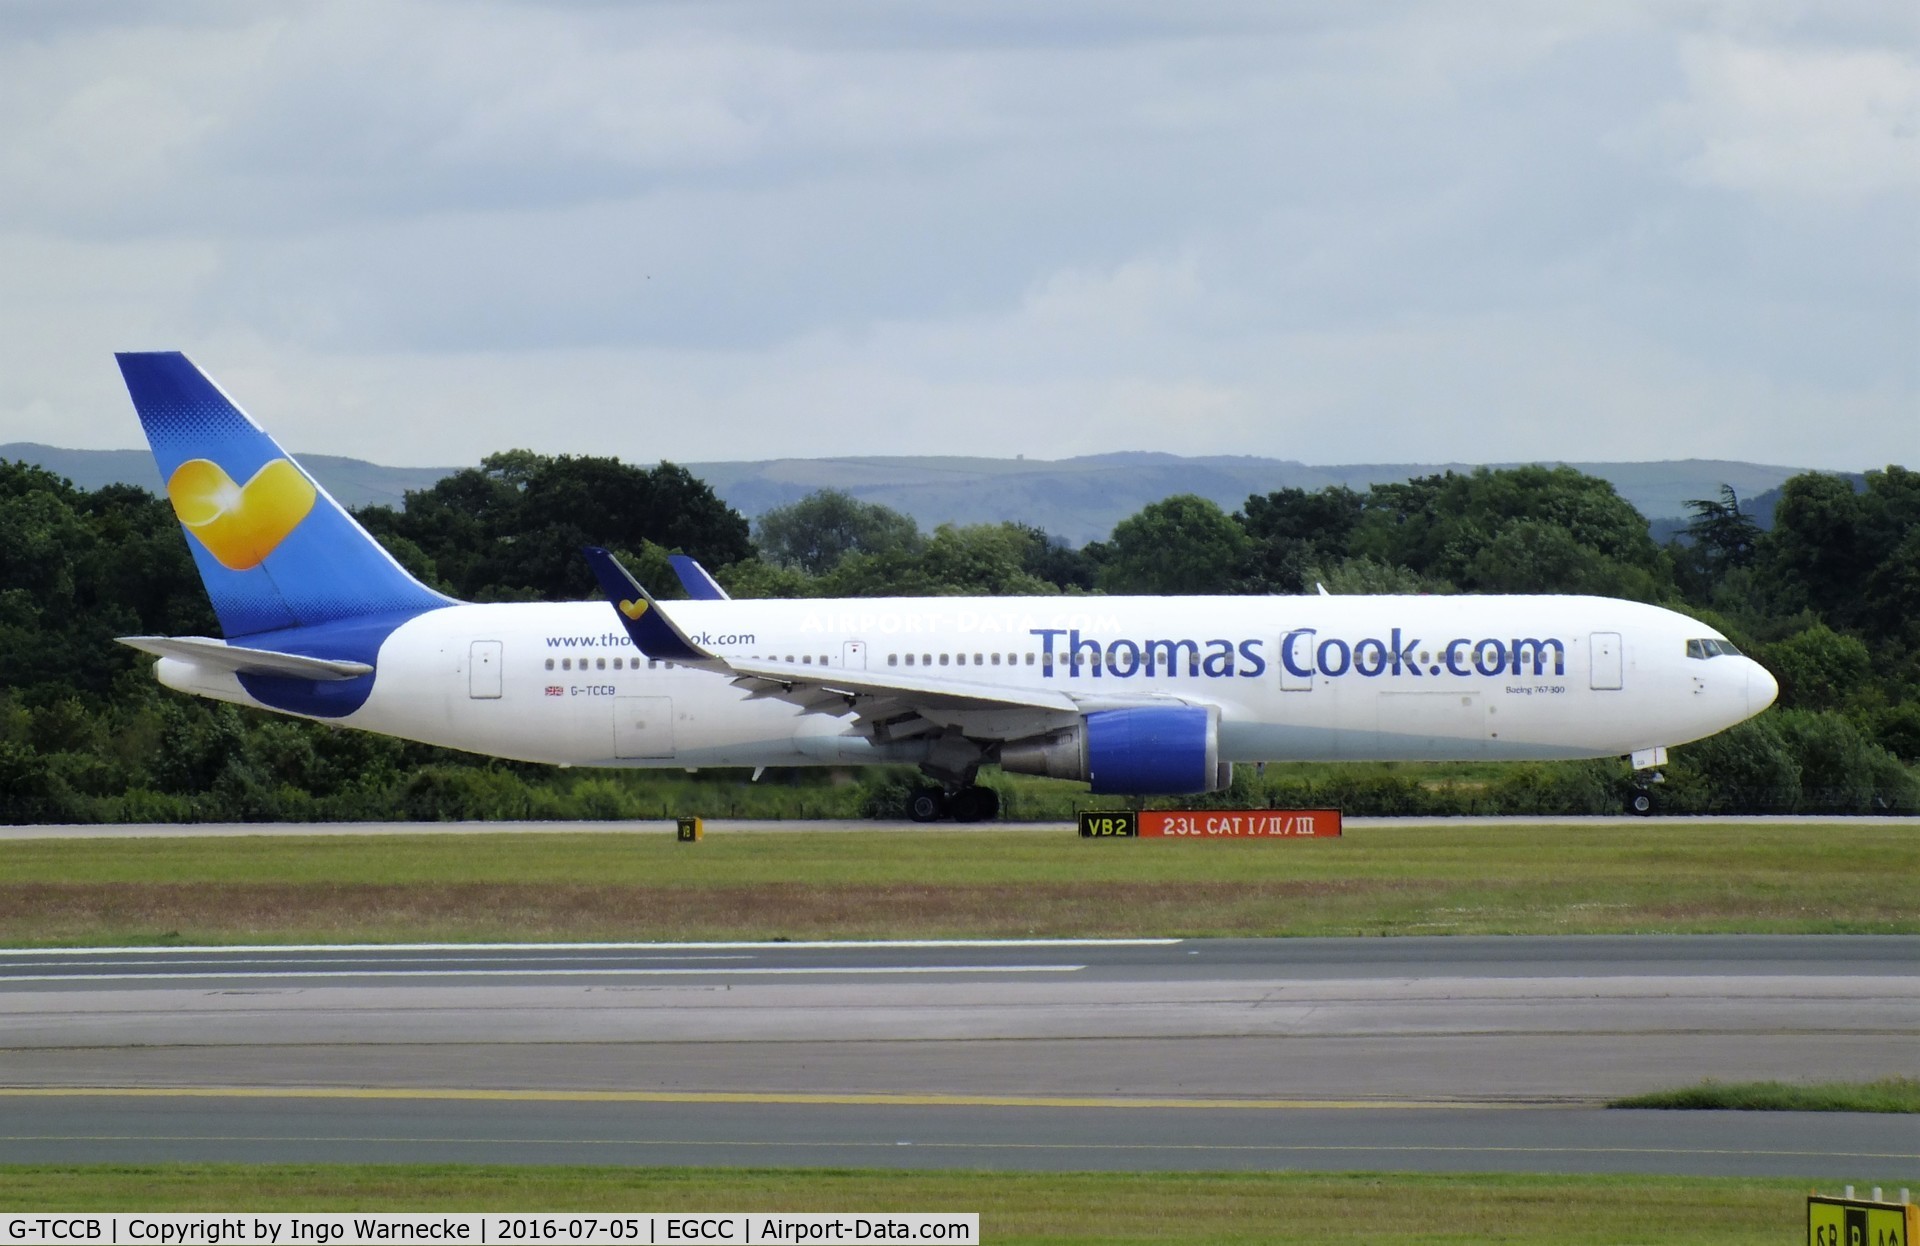 G-TCCB, 1997 Boeing 767-31K C/N 28865, Boeing 767-31K of Thomas Cook at Manchester airport